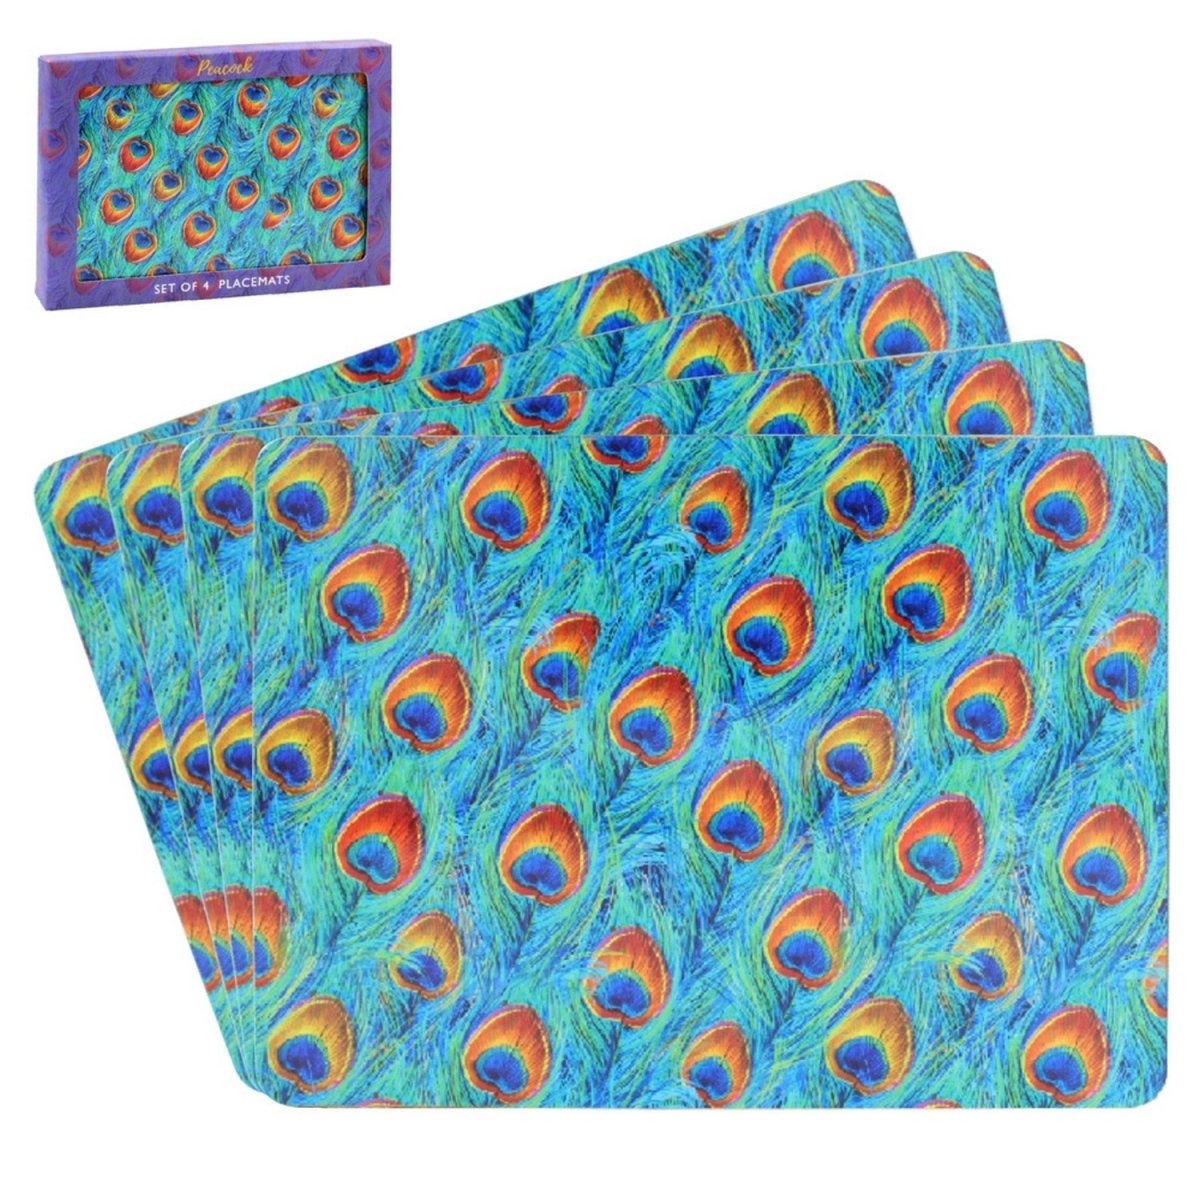 Peacock Placemats Set of 4 - Bonnypack